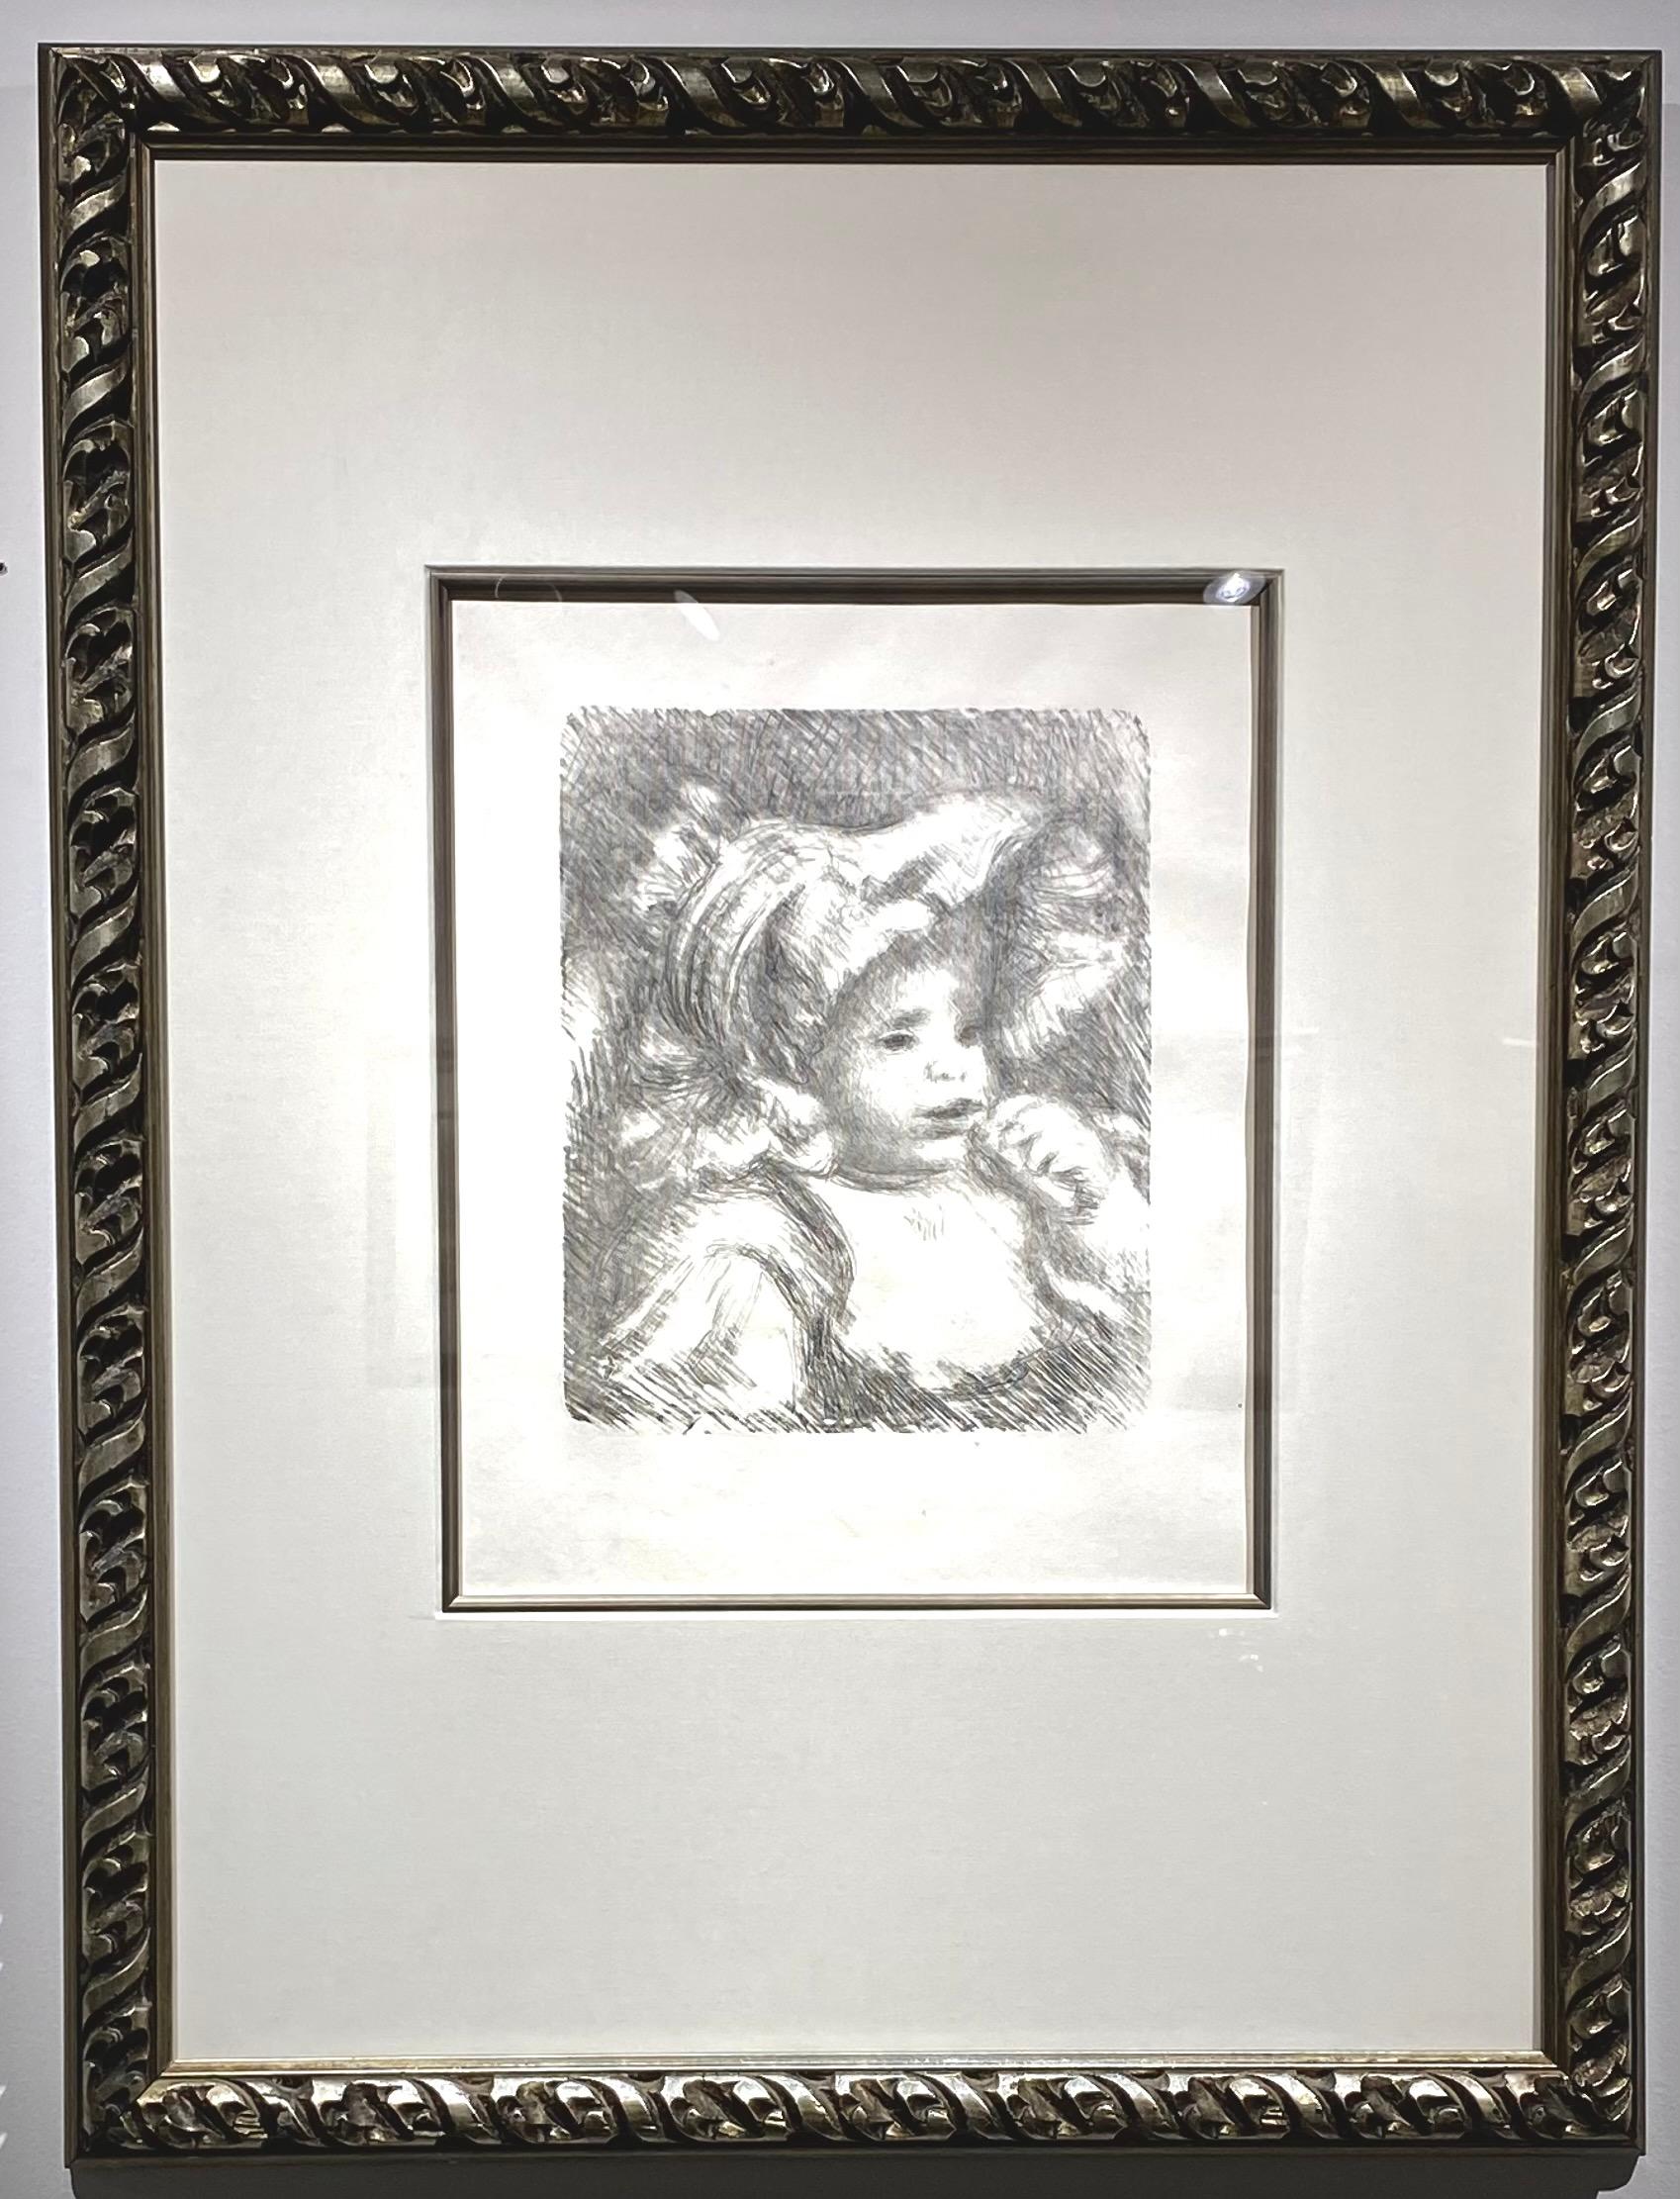 Pierre Auguste Renoir, 1841-1919                                  
"L'Enfant au Biscuit" (Jean Renoir)
1898-1899
Lithograph on Ingres d'Arches paper                                          

A rare proof, printed in black prior to the edition of